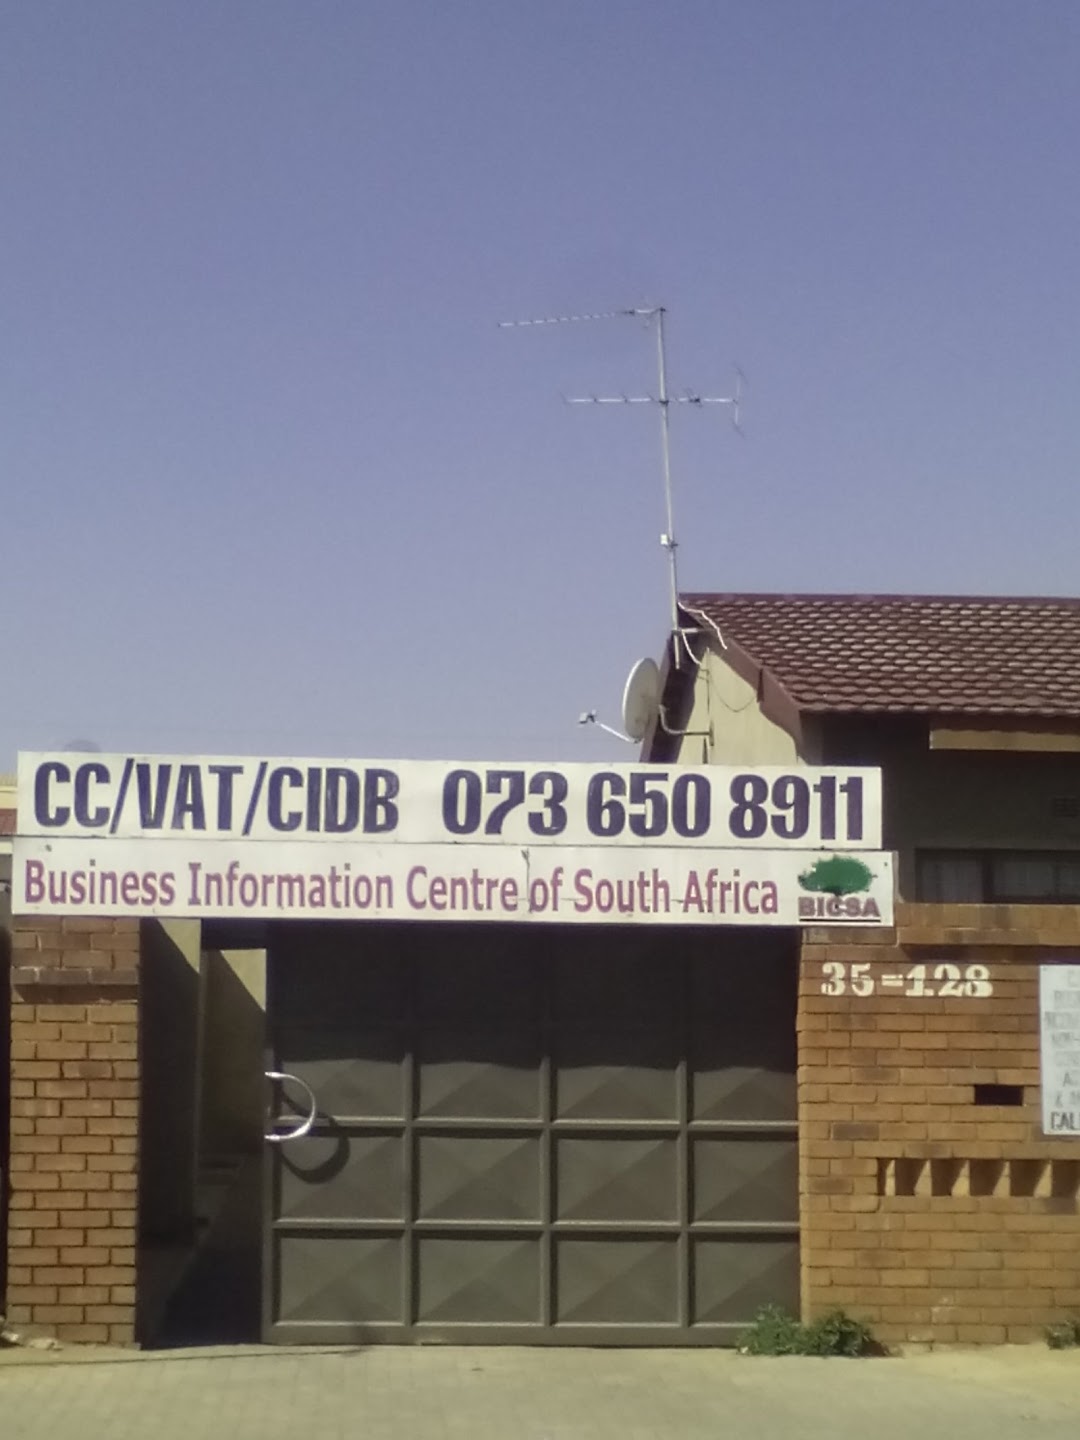 BUSINESS INFORMATION CENTRE OF SOUTH AFRICA